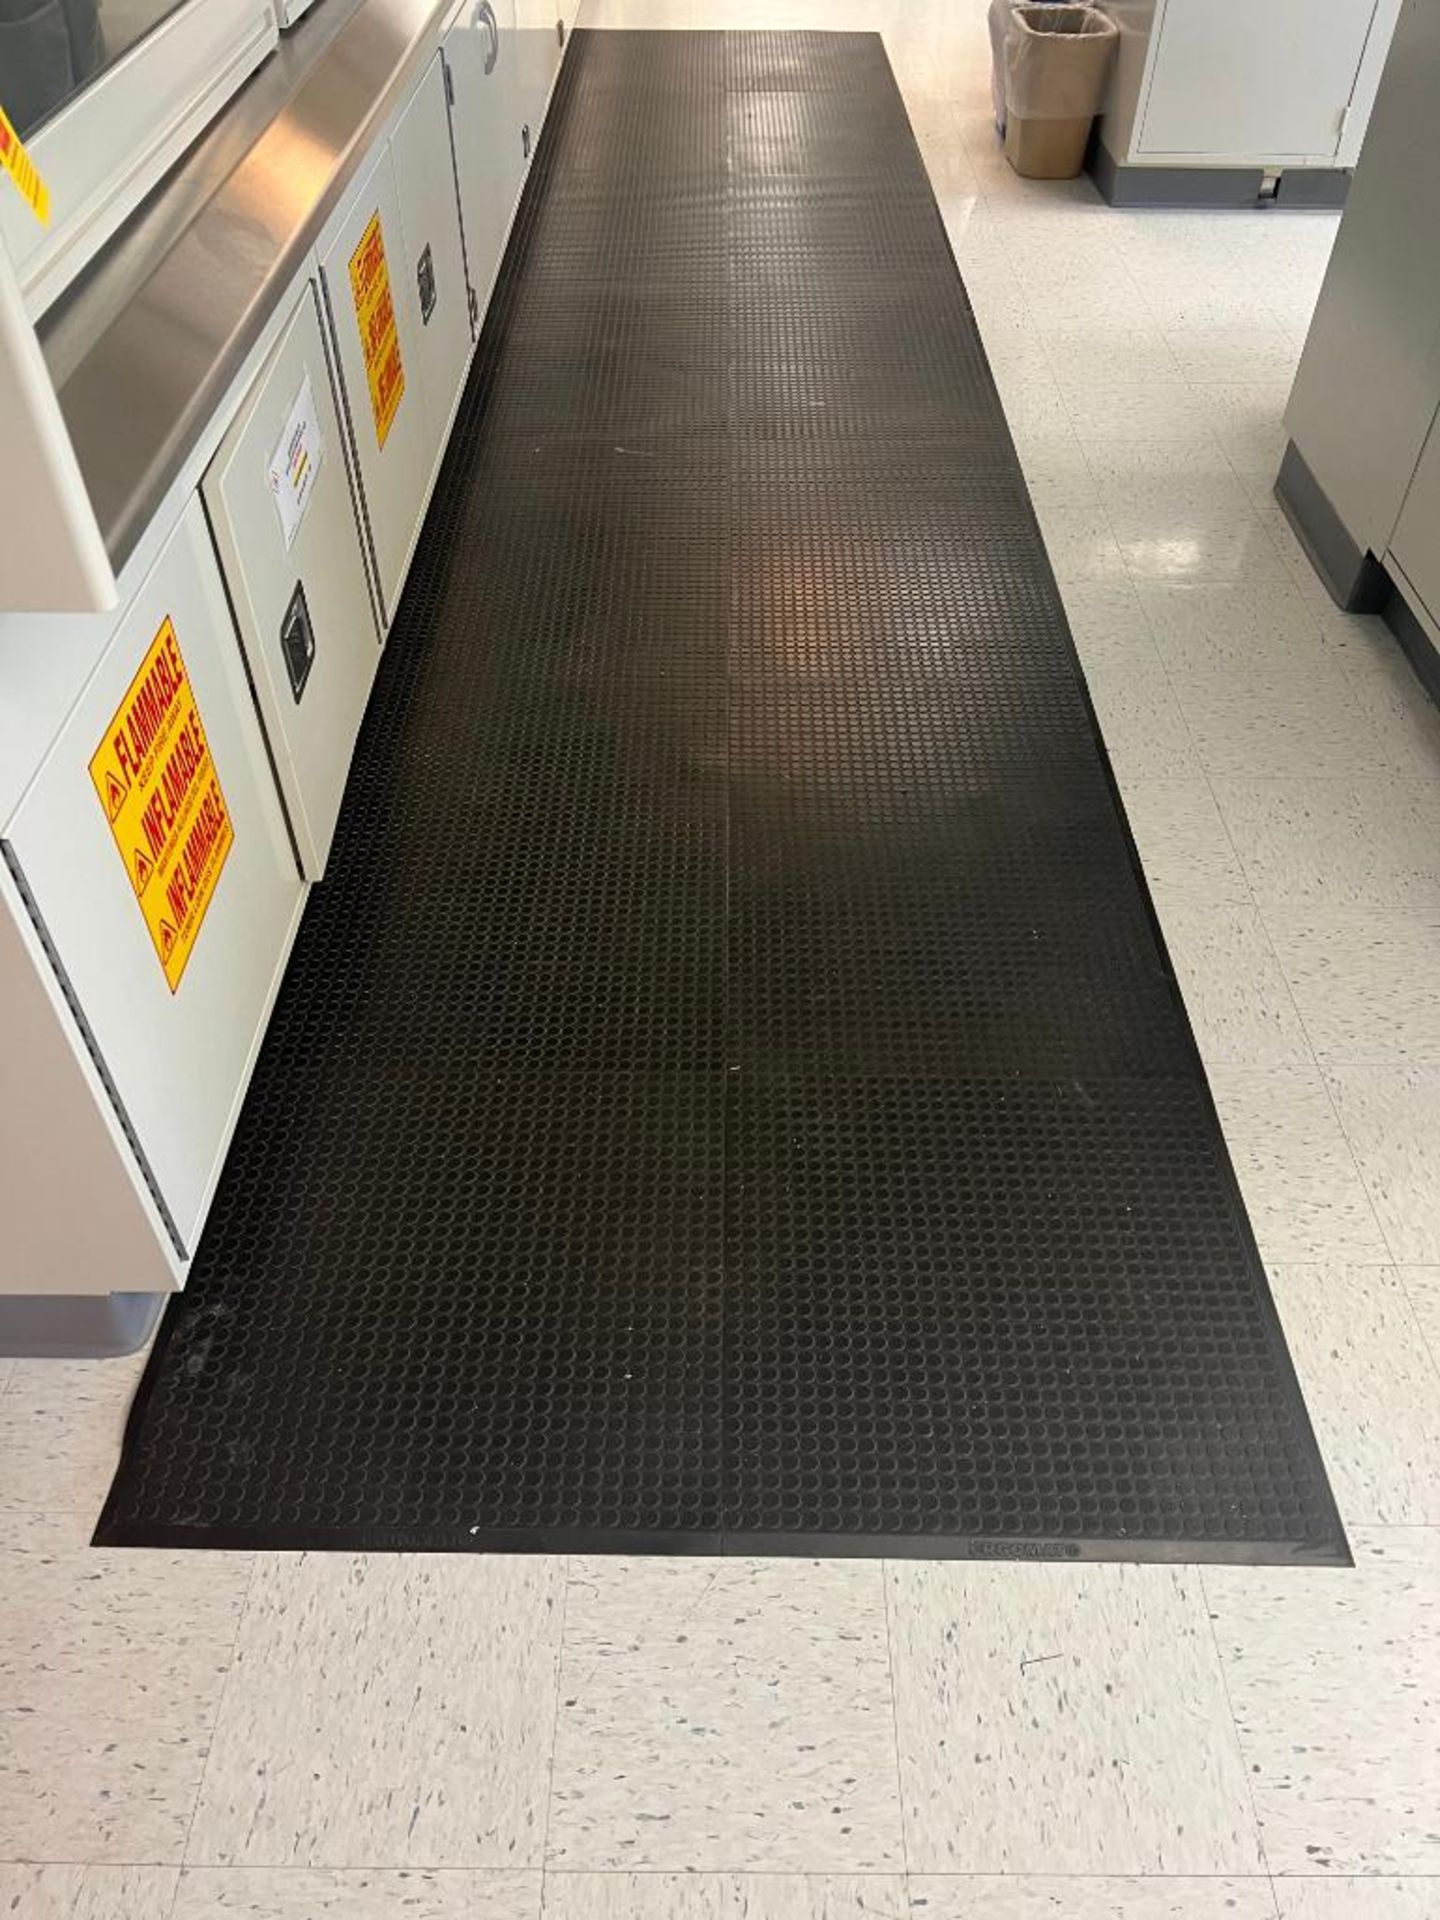 Rubber Floor Mats, Dimensions = 16' x 44" and (3) 20' x 44" - Rigging Fee: $50 - Image 3 of 4